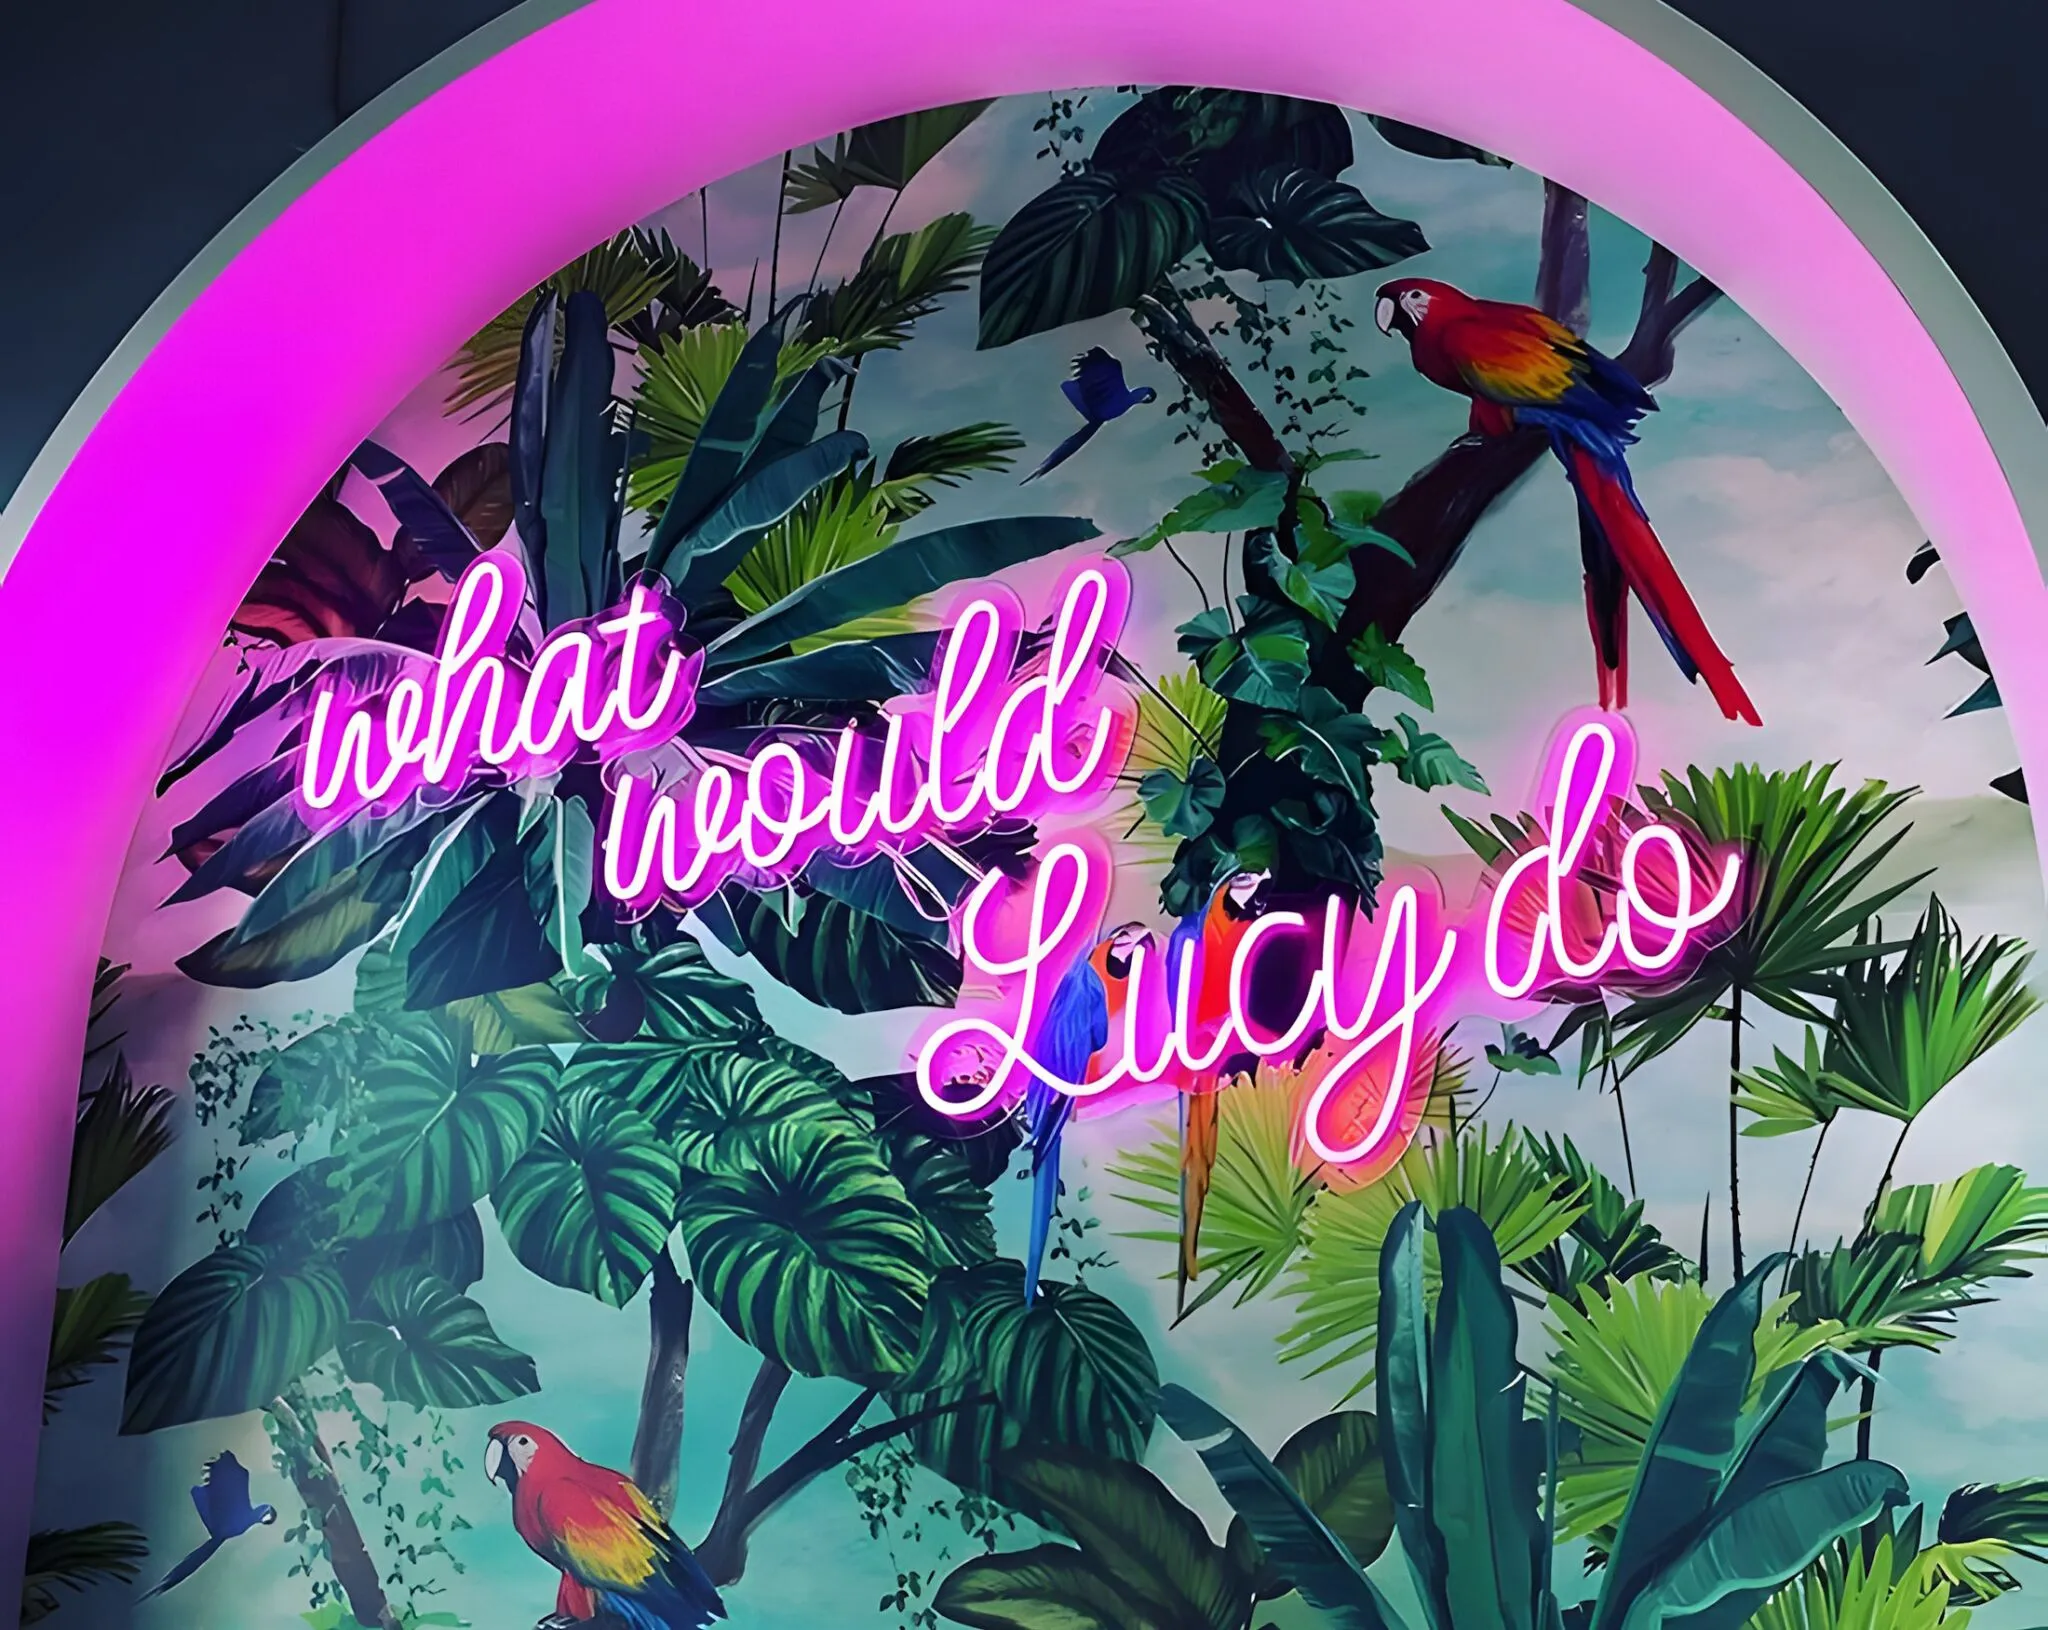 A vibrant mural with lush green tropical foliage and brightly colored parrots, framed by a glowing pink neon light arch featuring the neon-lit phrase "what would Lucy do".